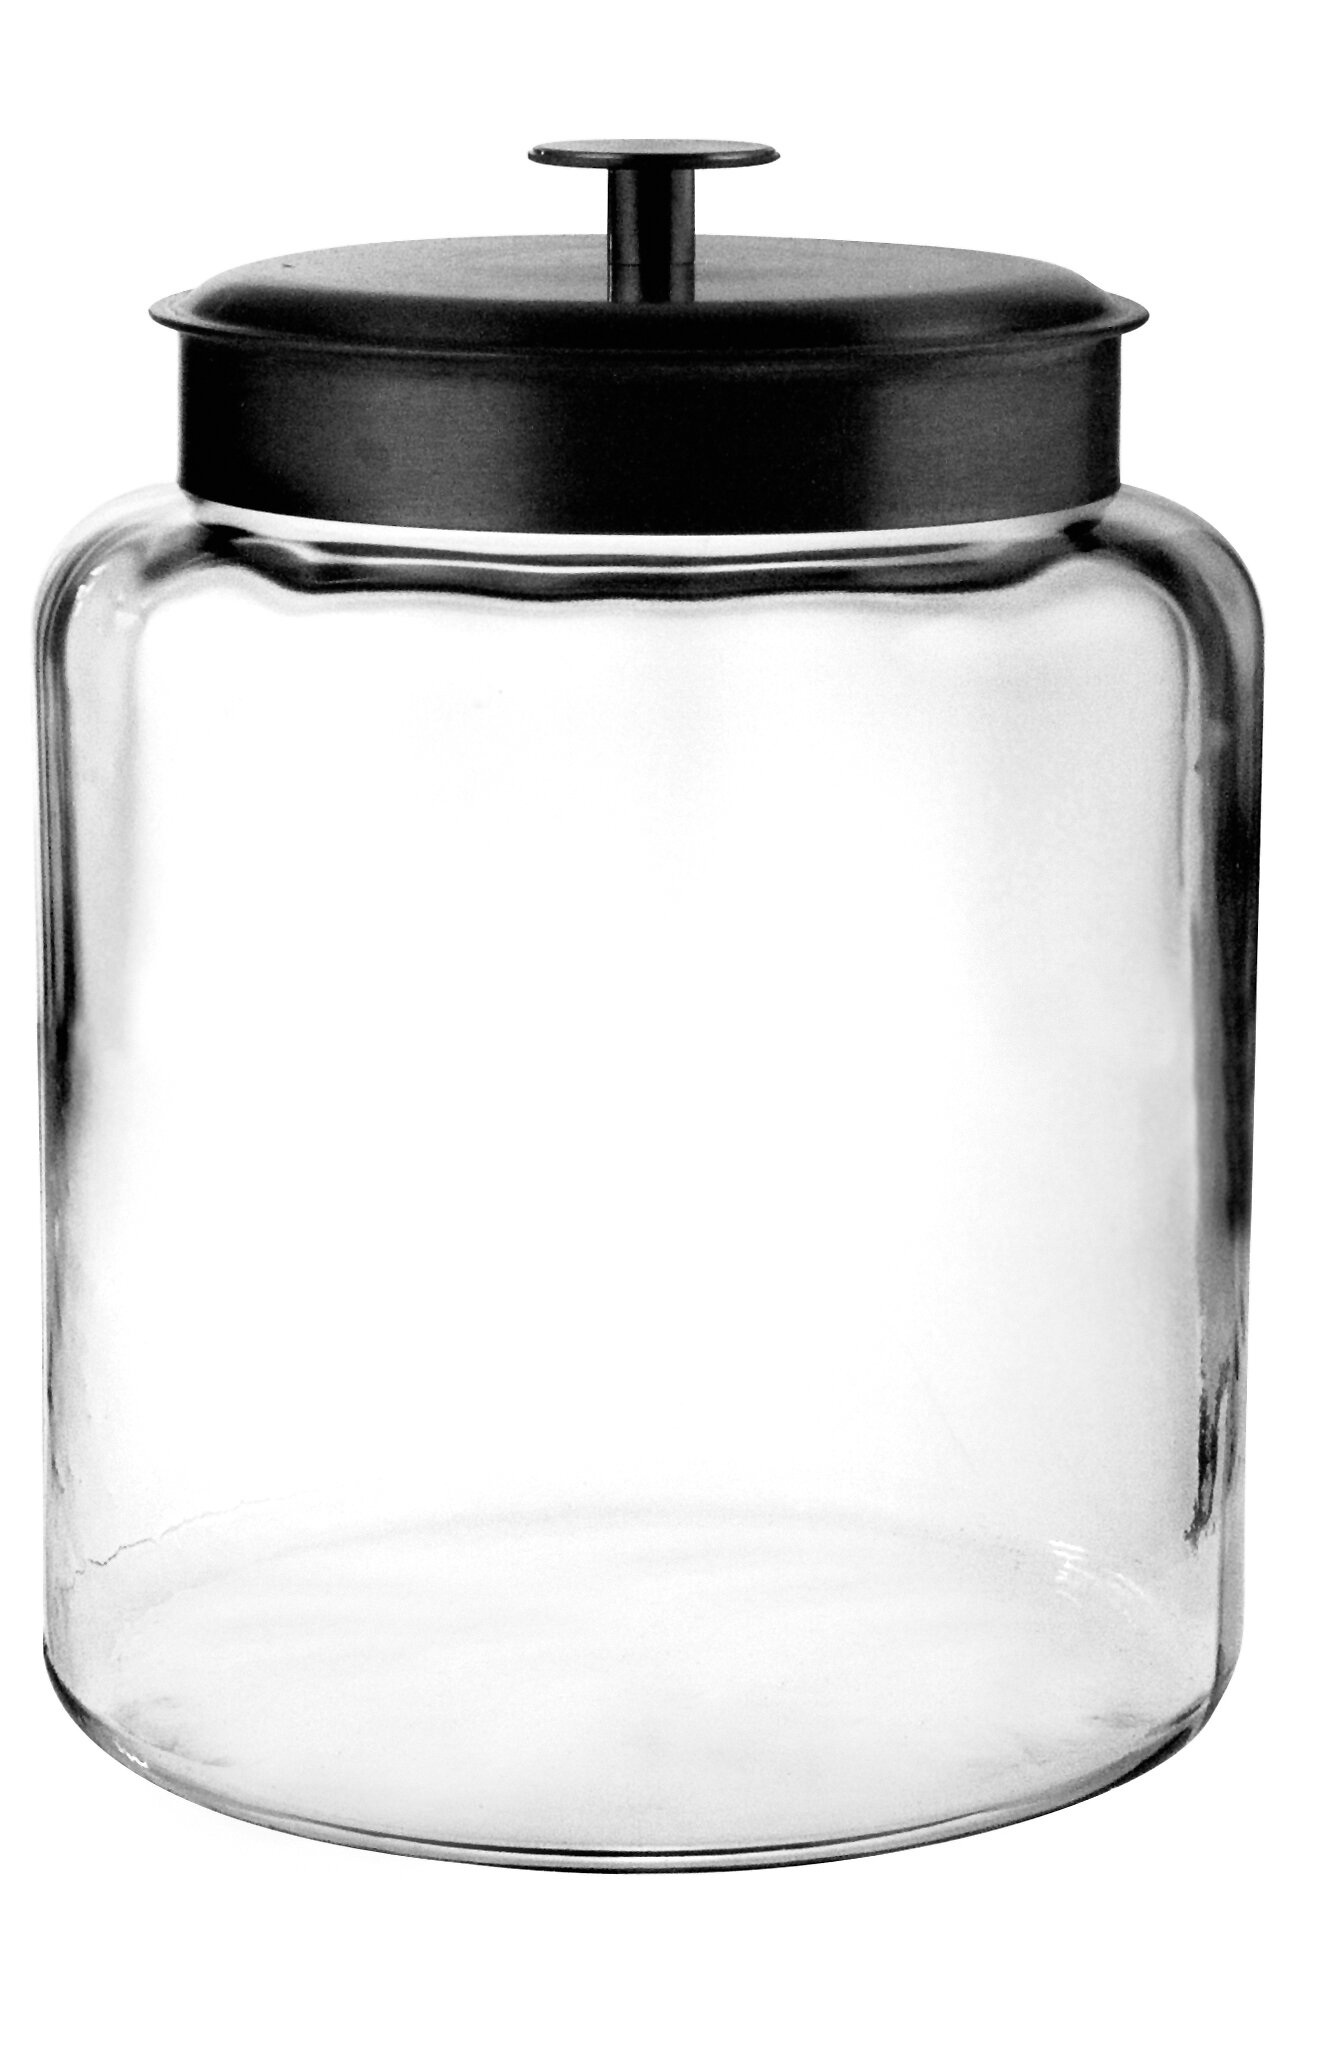 Anchor Hocking Montana Glass 8 Qt Storage Jar With Lid Reviews